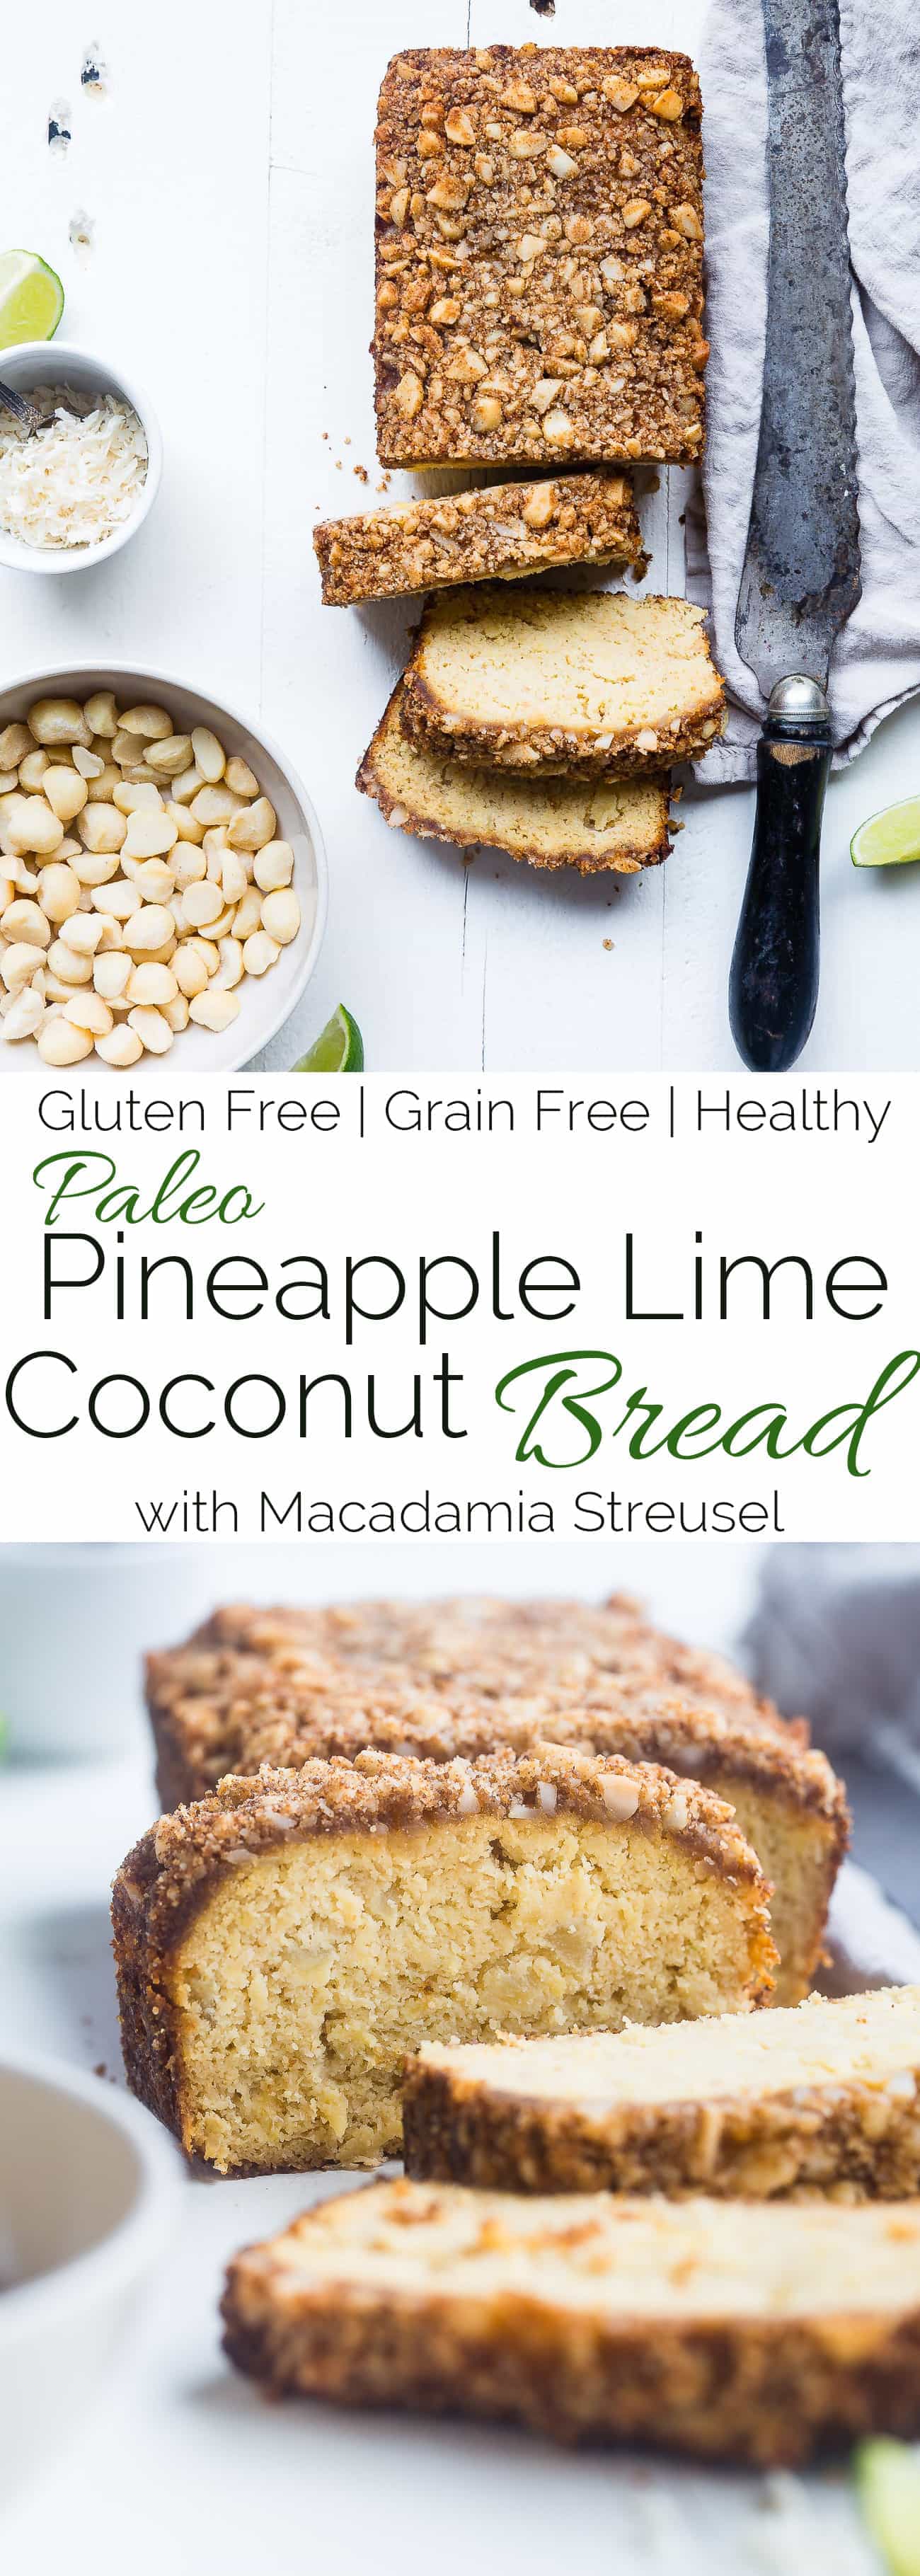 Paleo Pineapple Coconut Lime Bread - This healthy, paleo pineapple bread is a gluten, grain and dairy free summer treat! Complete with macadamia streusel, this will be a crowd pleaser! | Foodfaithfitness.com | @FoodFaithFit